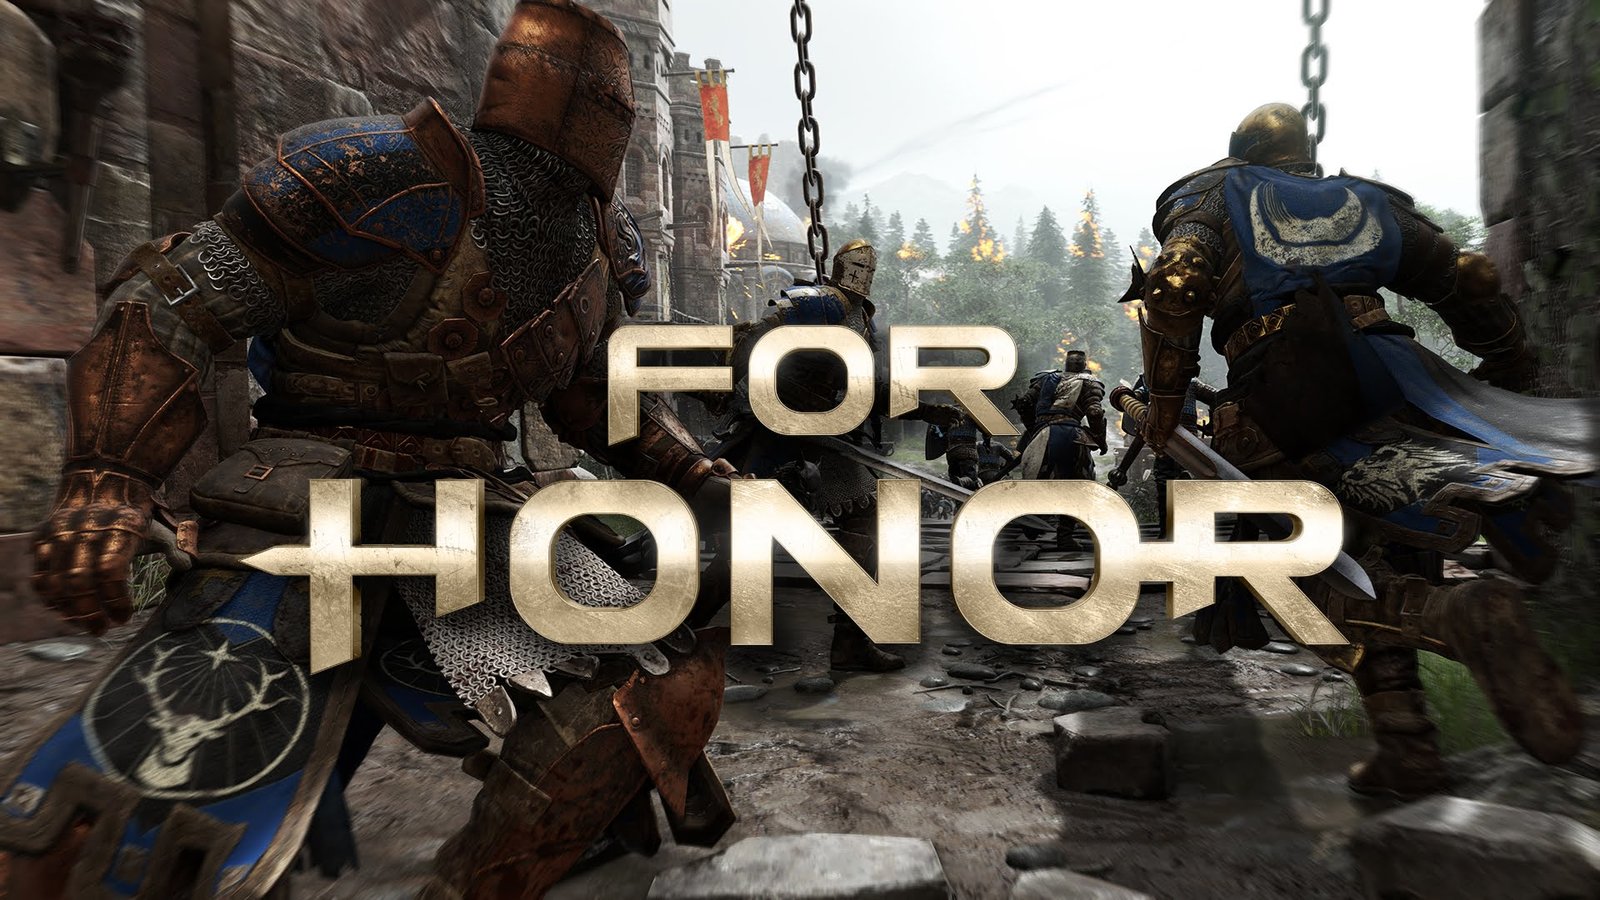 For Honor: Deluxe Edition